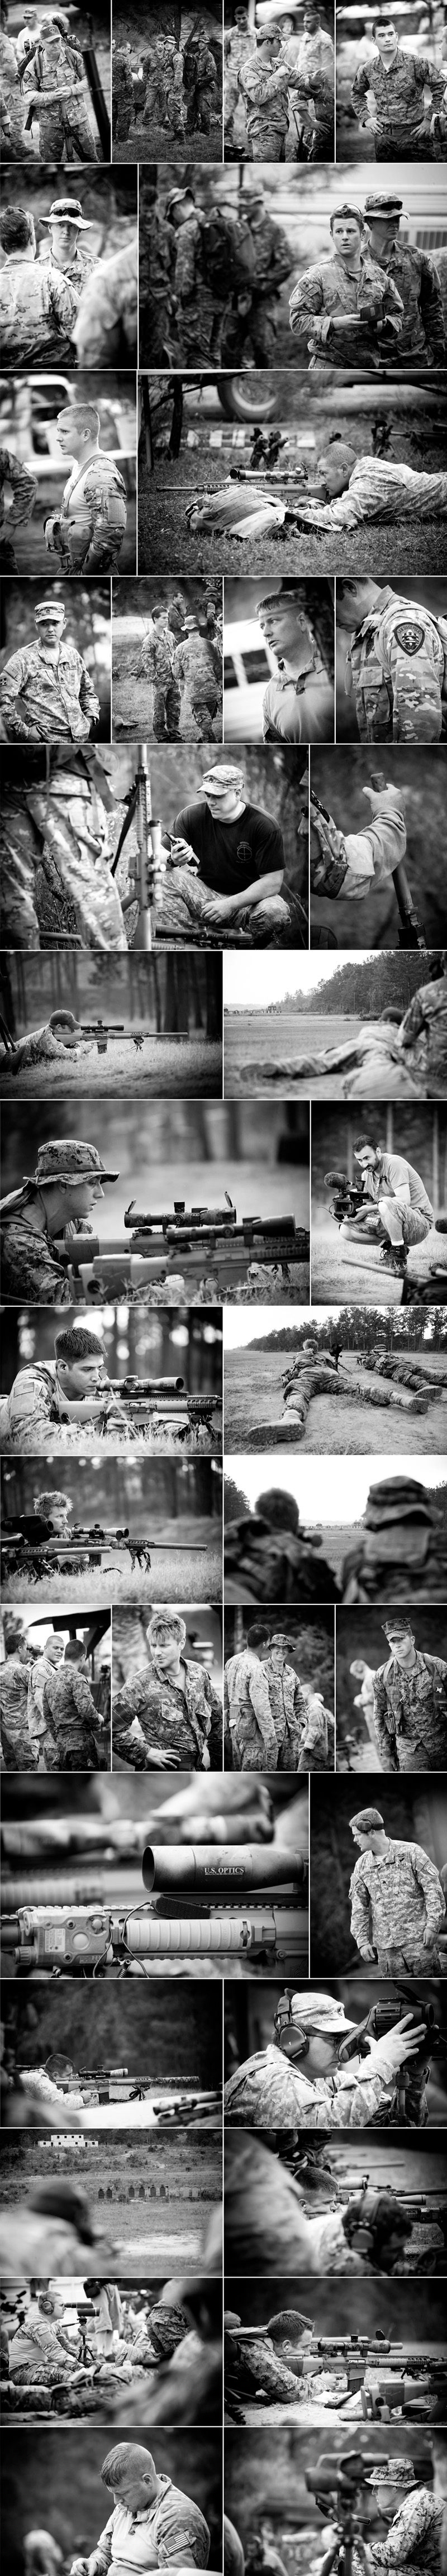 Fort Benning Moore Sniper Competition